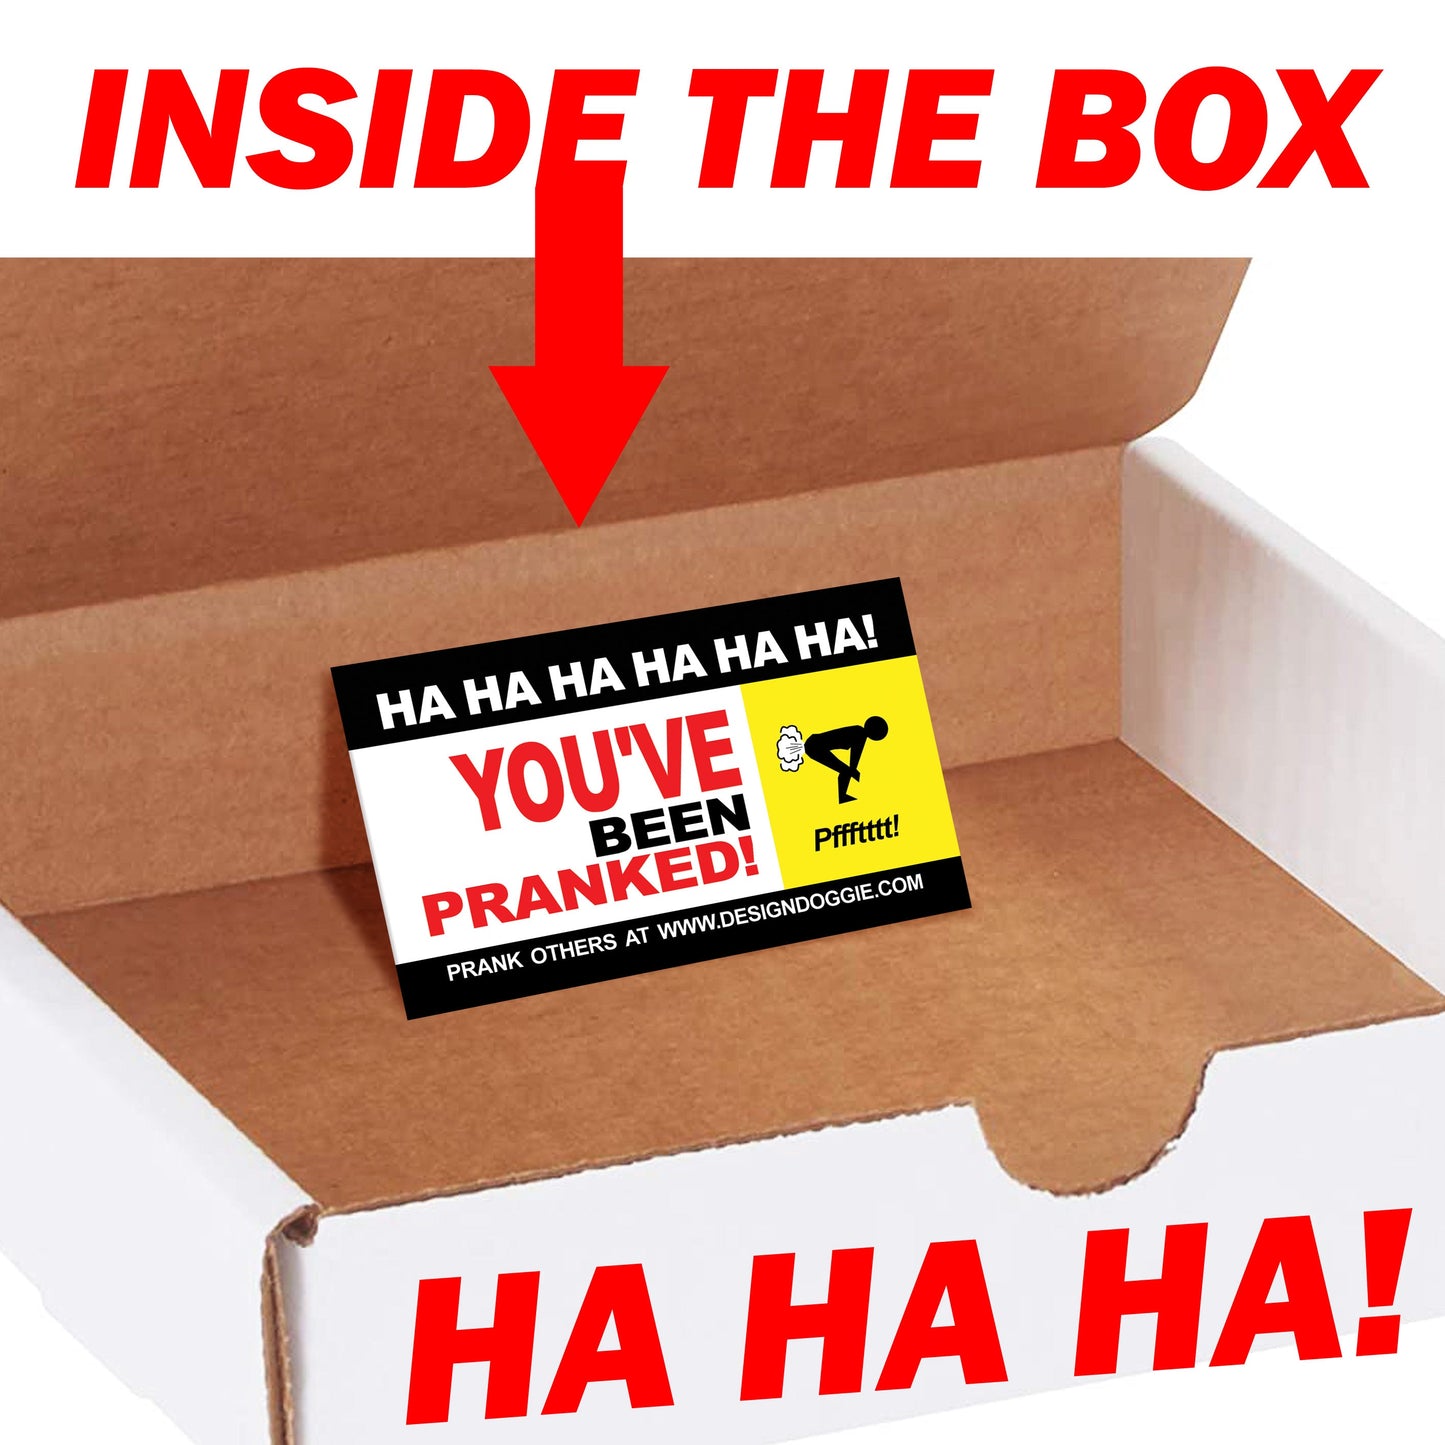 Mailman Seduction Kit Postie Postal Worker Joke embarrassing prank box gets mailed directly to your victims 100% anonymously!